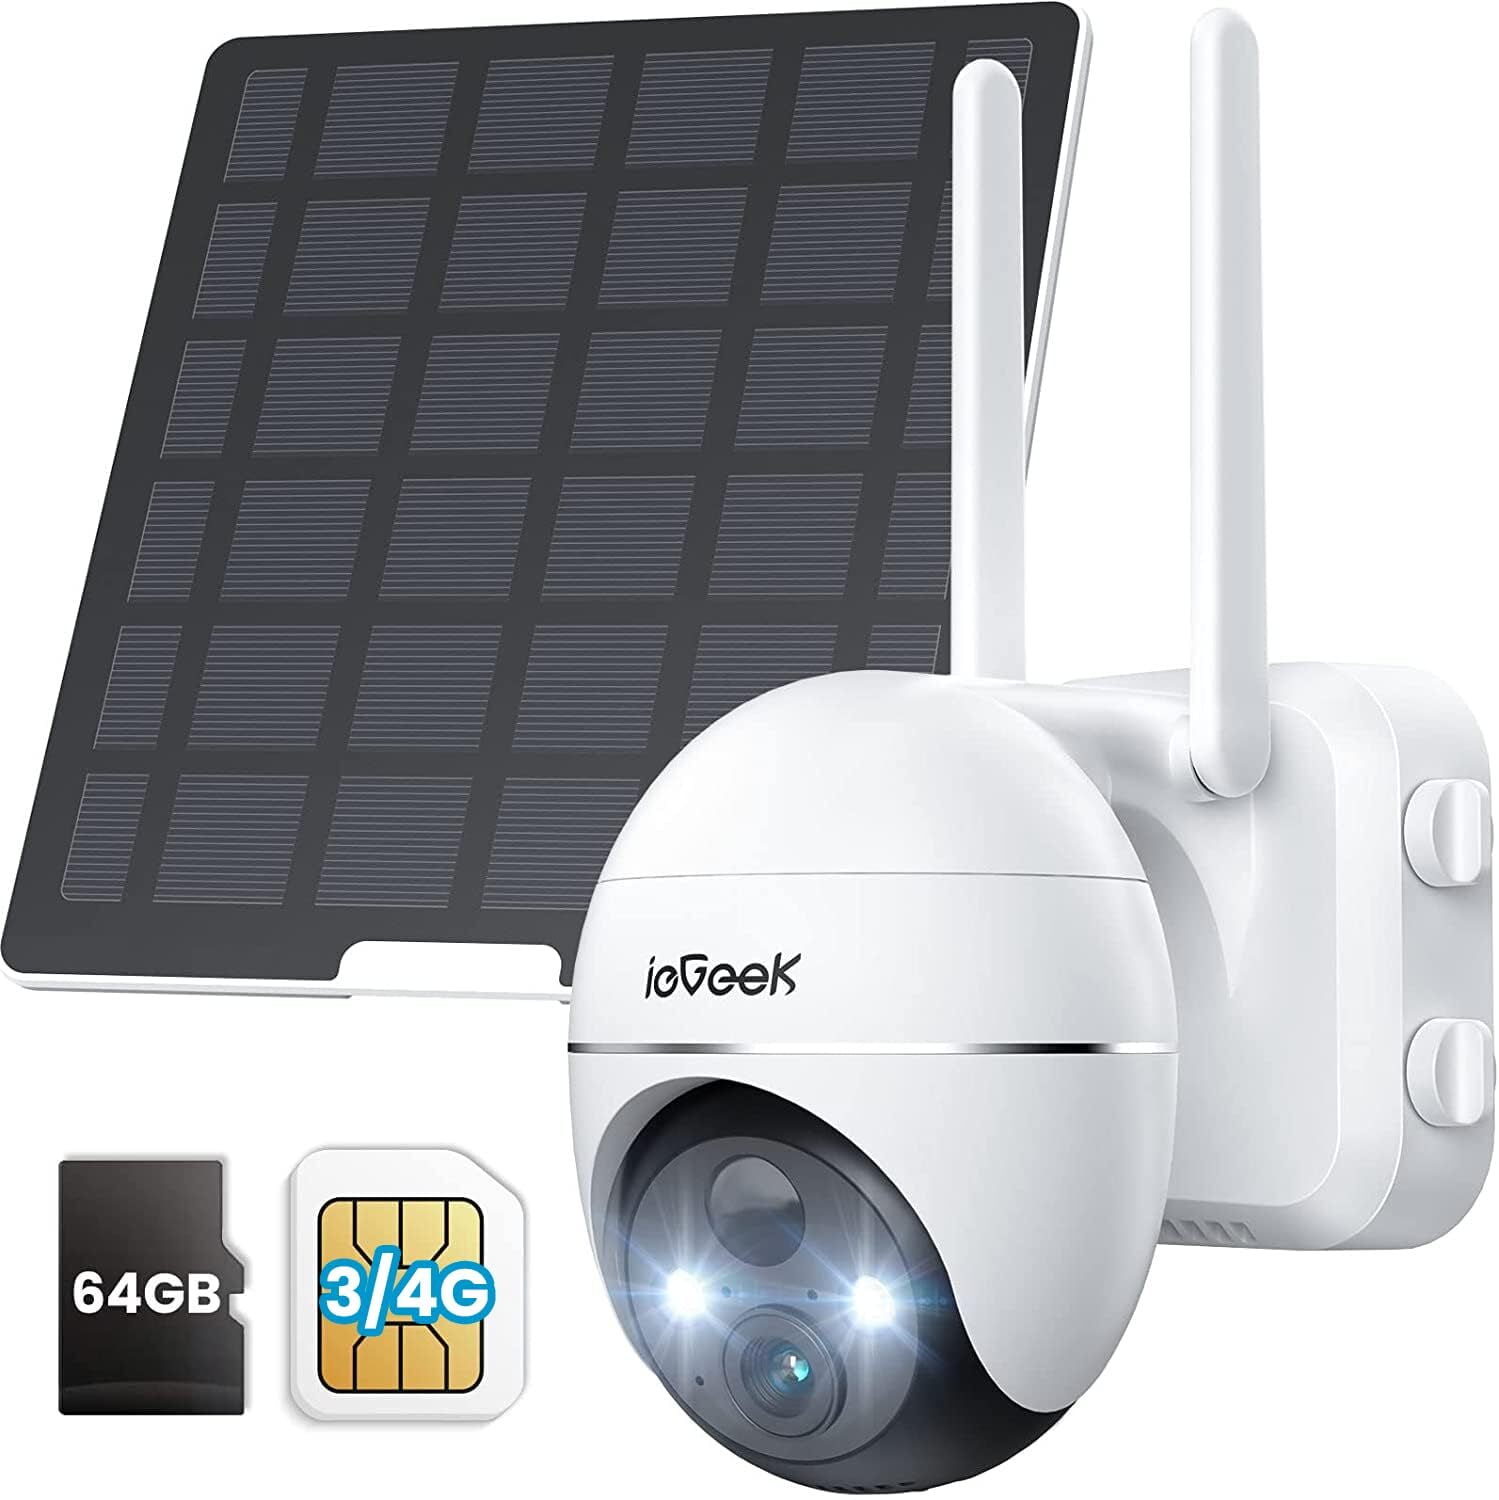 ieGeek 3G/4G LTE Cellular Security Camera Wireless, Outdoor, Solar Powered,  2K QHD, 360° PTZ, No WiFi Surveillance Camera, Color Night Vision, SIM&64GB  SD Card Included 